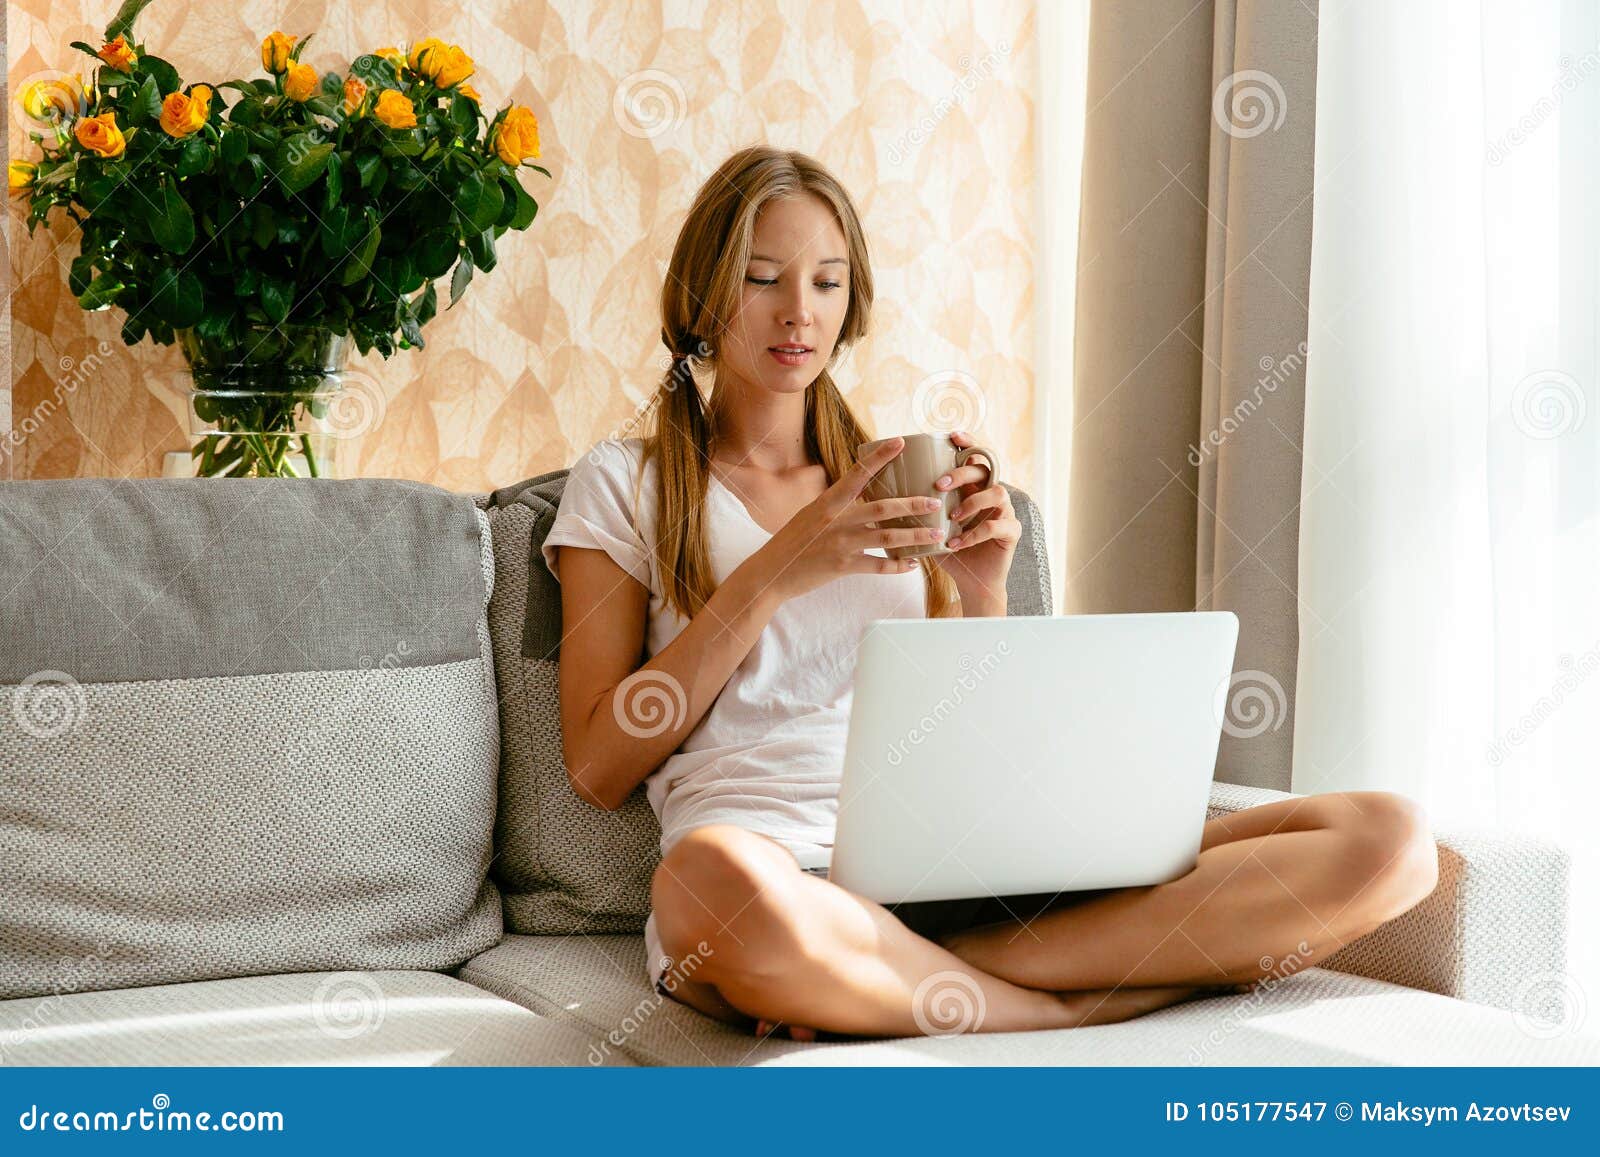 woman watching tv series on laptop on sofa at home